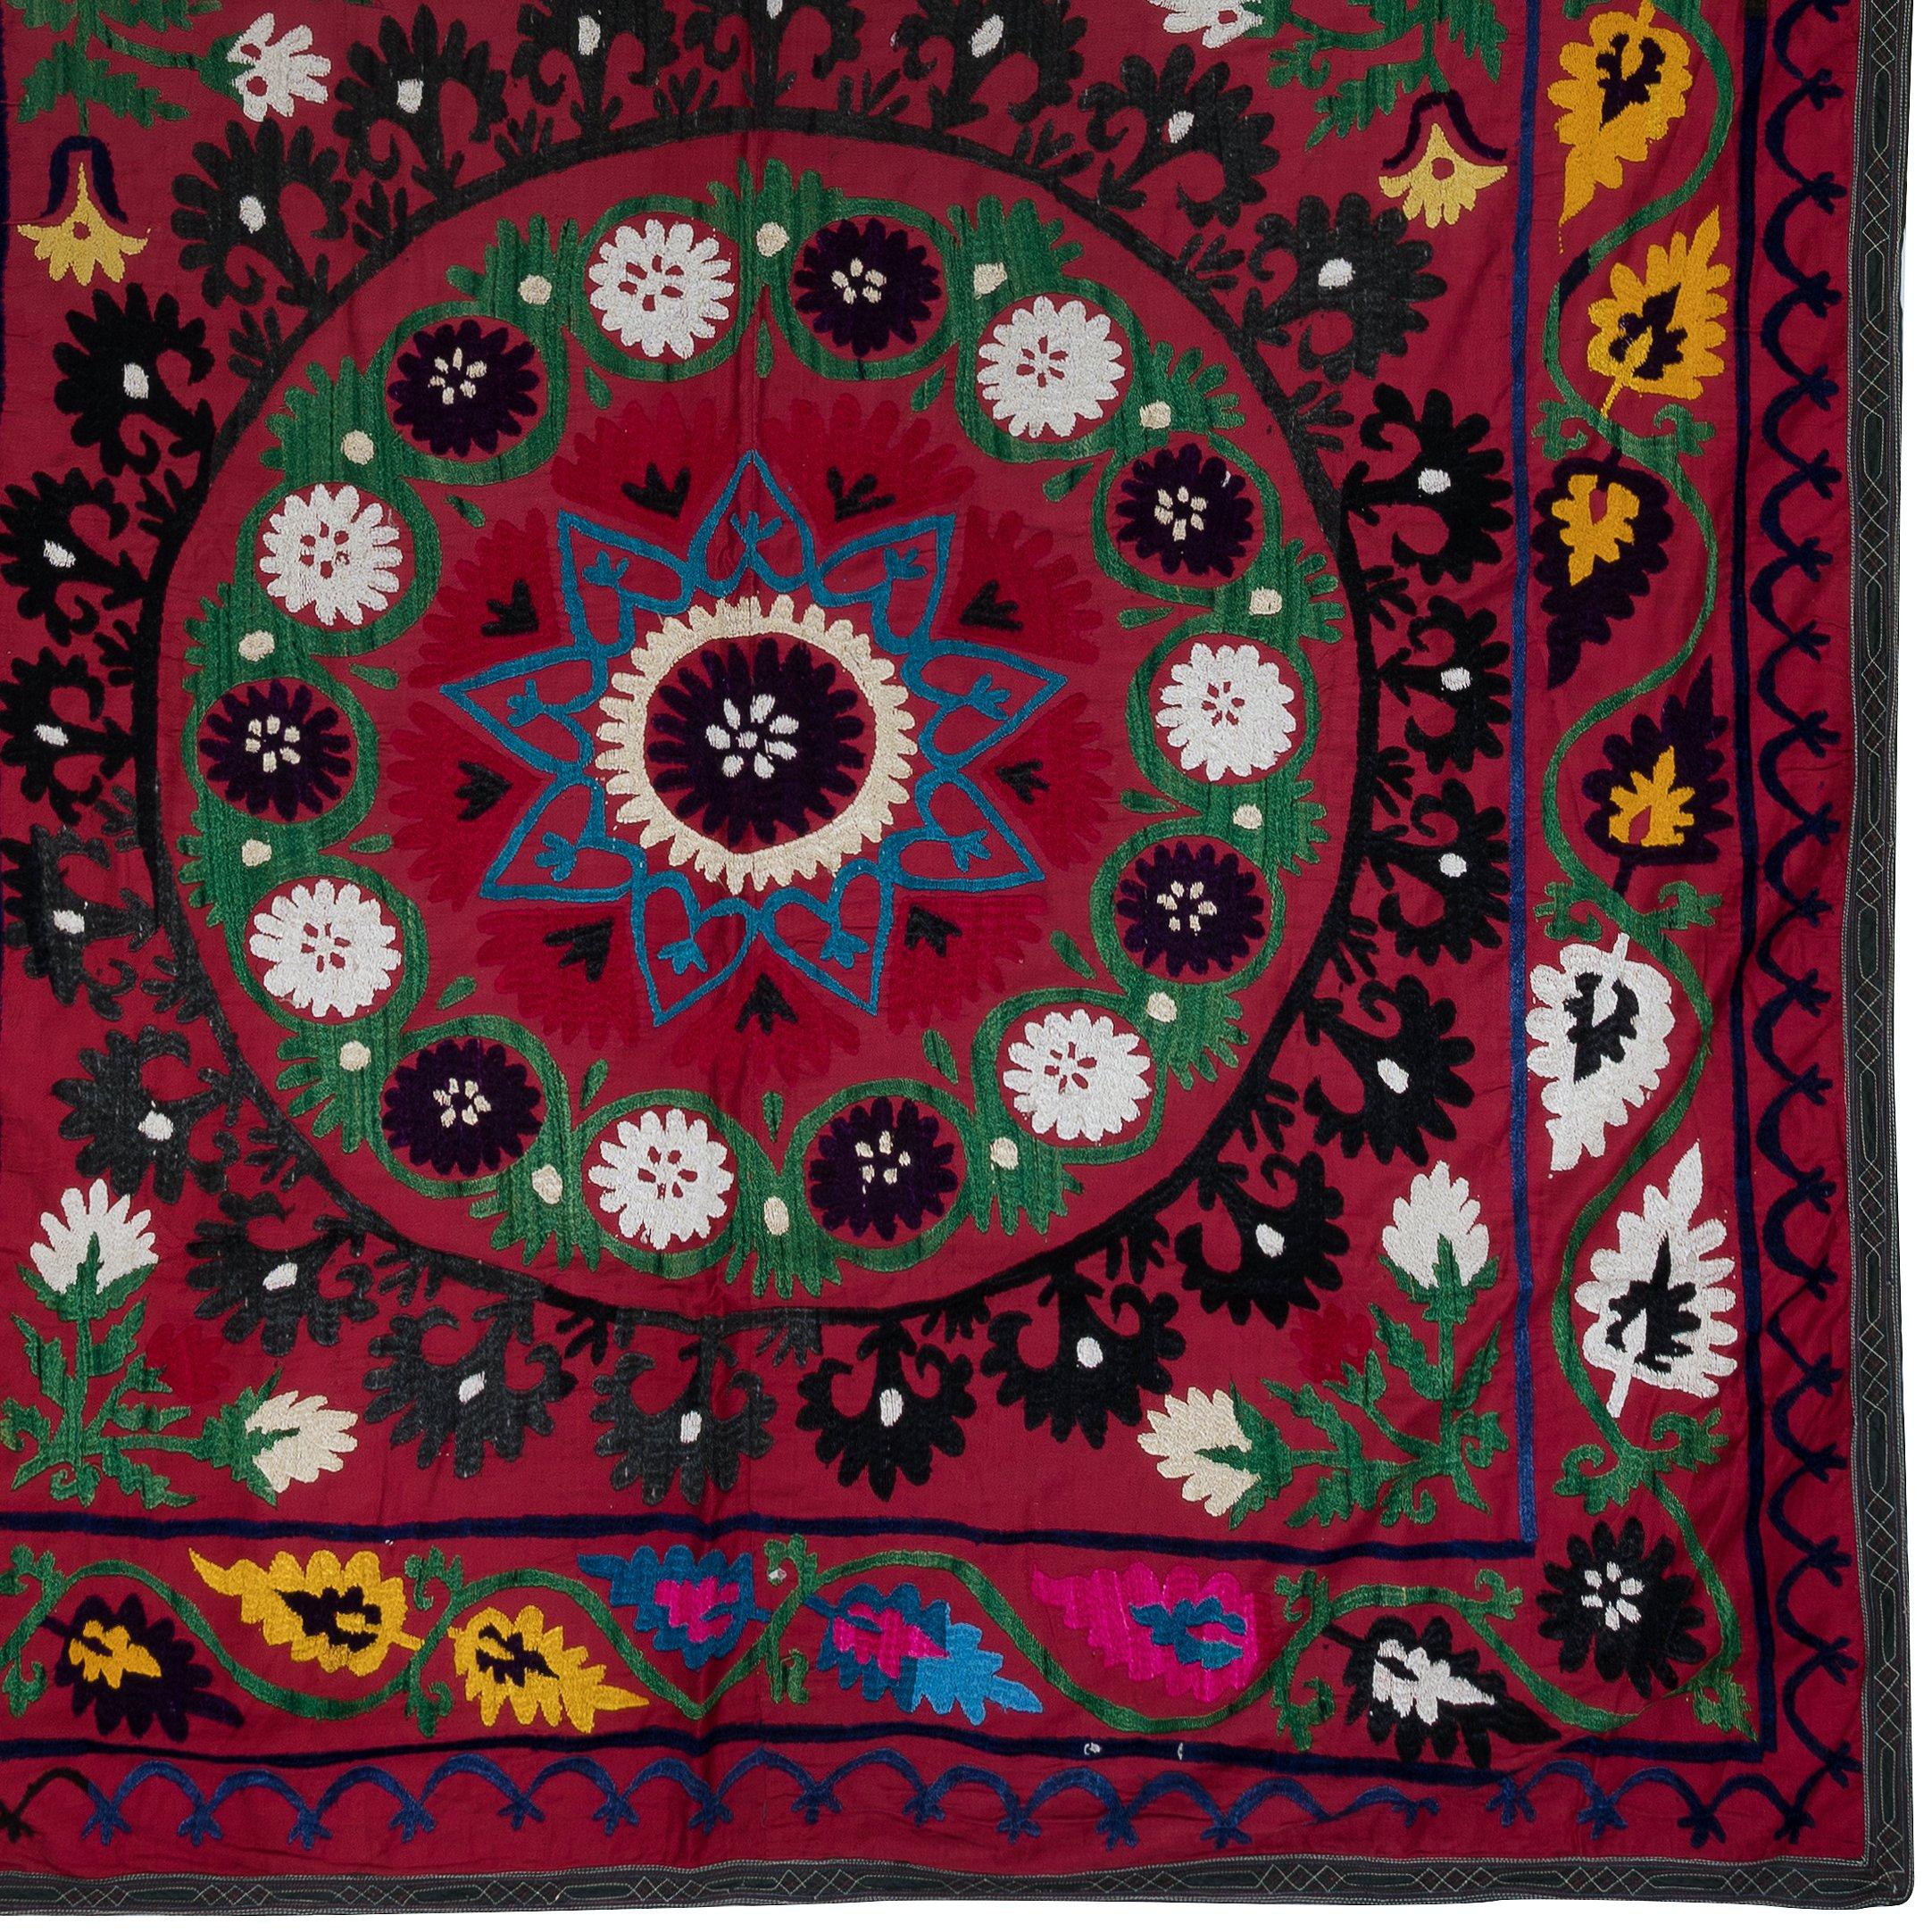 Uzbek 4.7x8.2 ft Vintage Silk Embroidered Wall Hanging, Red Handmade Suzani Bed Cover For Sale